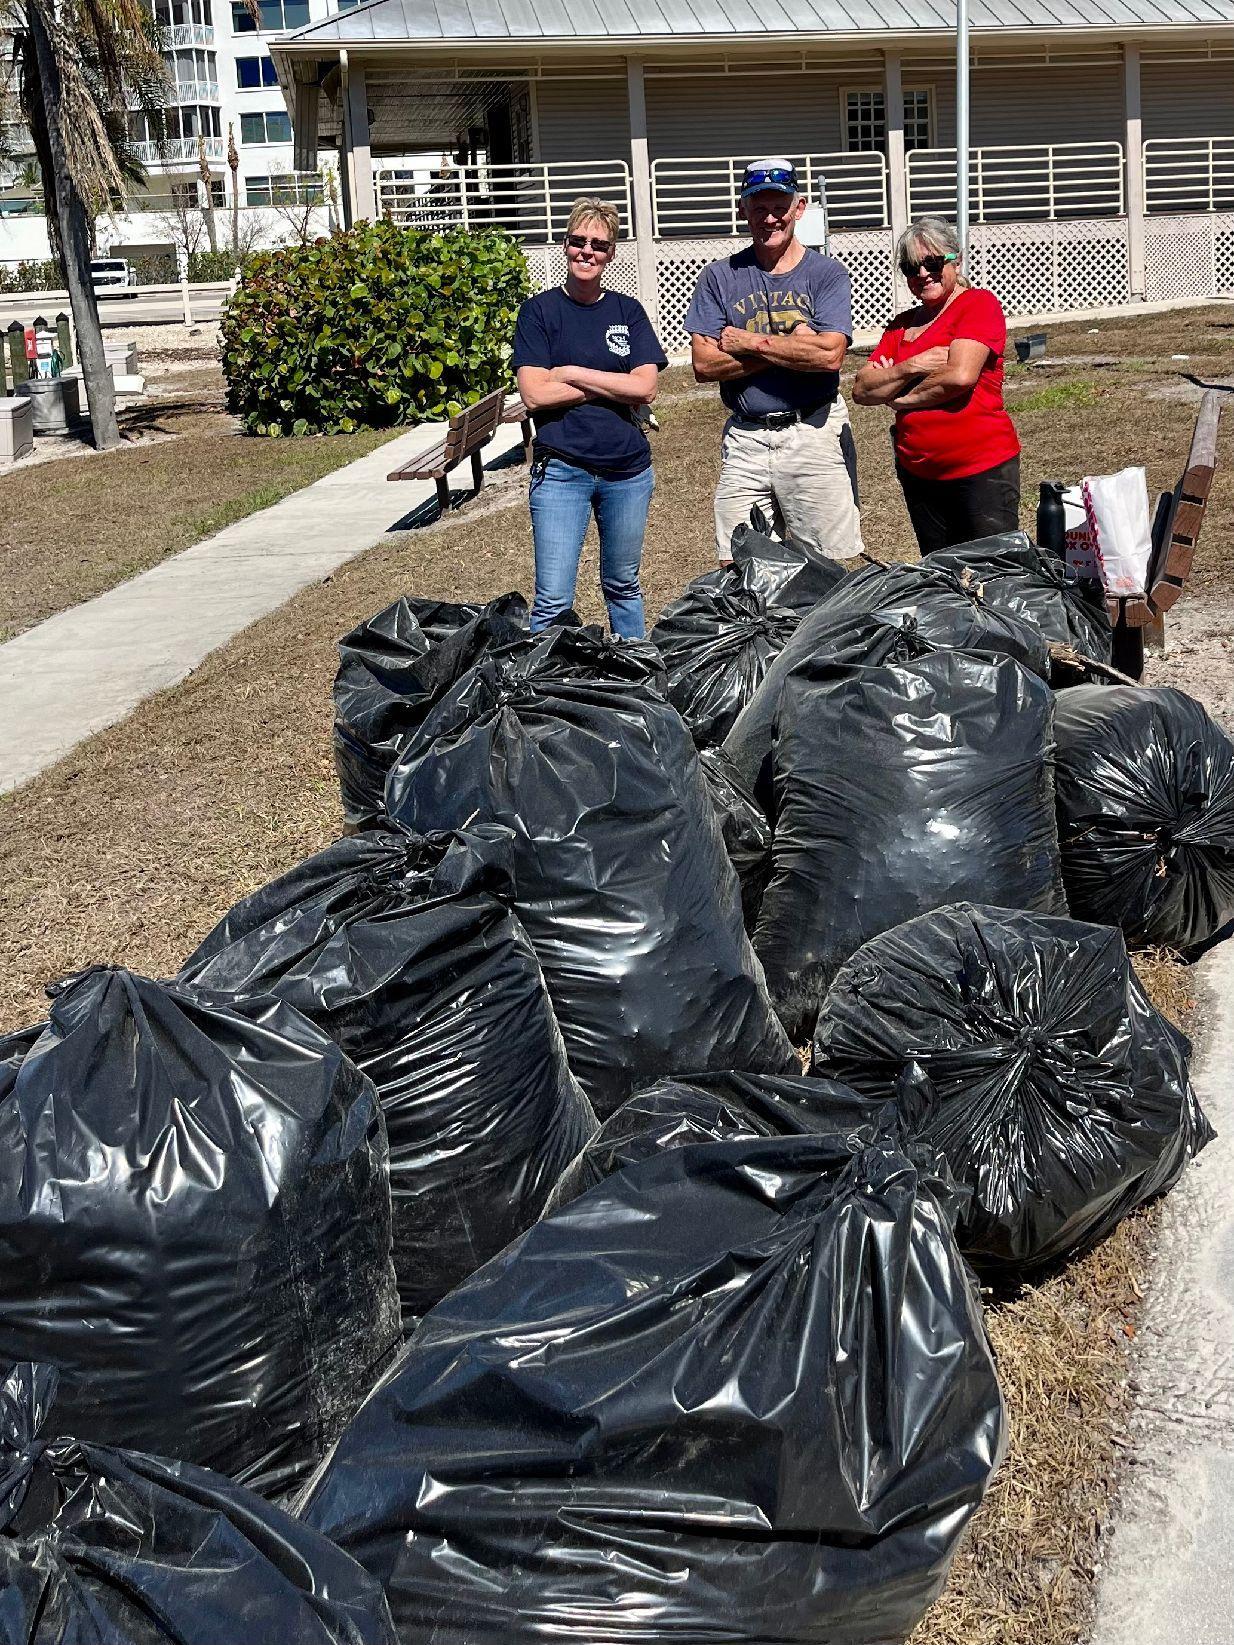 Ellen DeLeo, Terry Schwinghammer, and Heidi LaQuadra pose proudly with some of the 28 bags they packed with hurricane debris outside the Wiggins Pass Flotilla meeting place on October 22, 2022